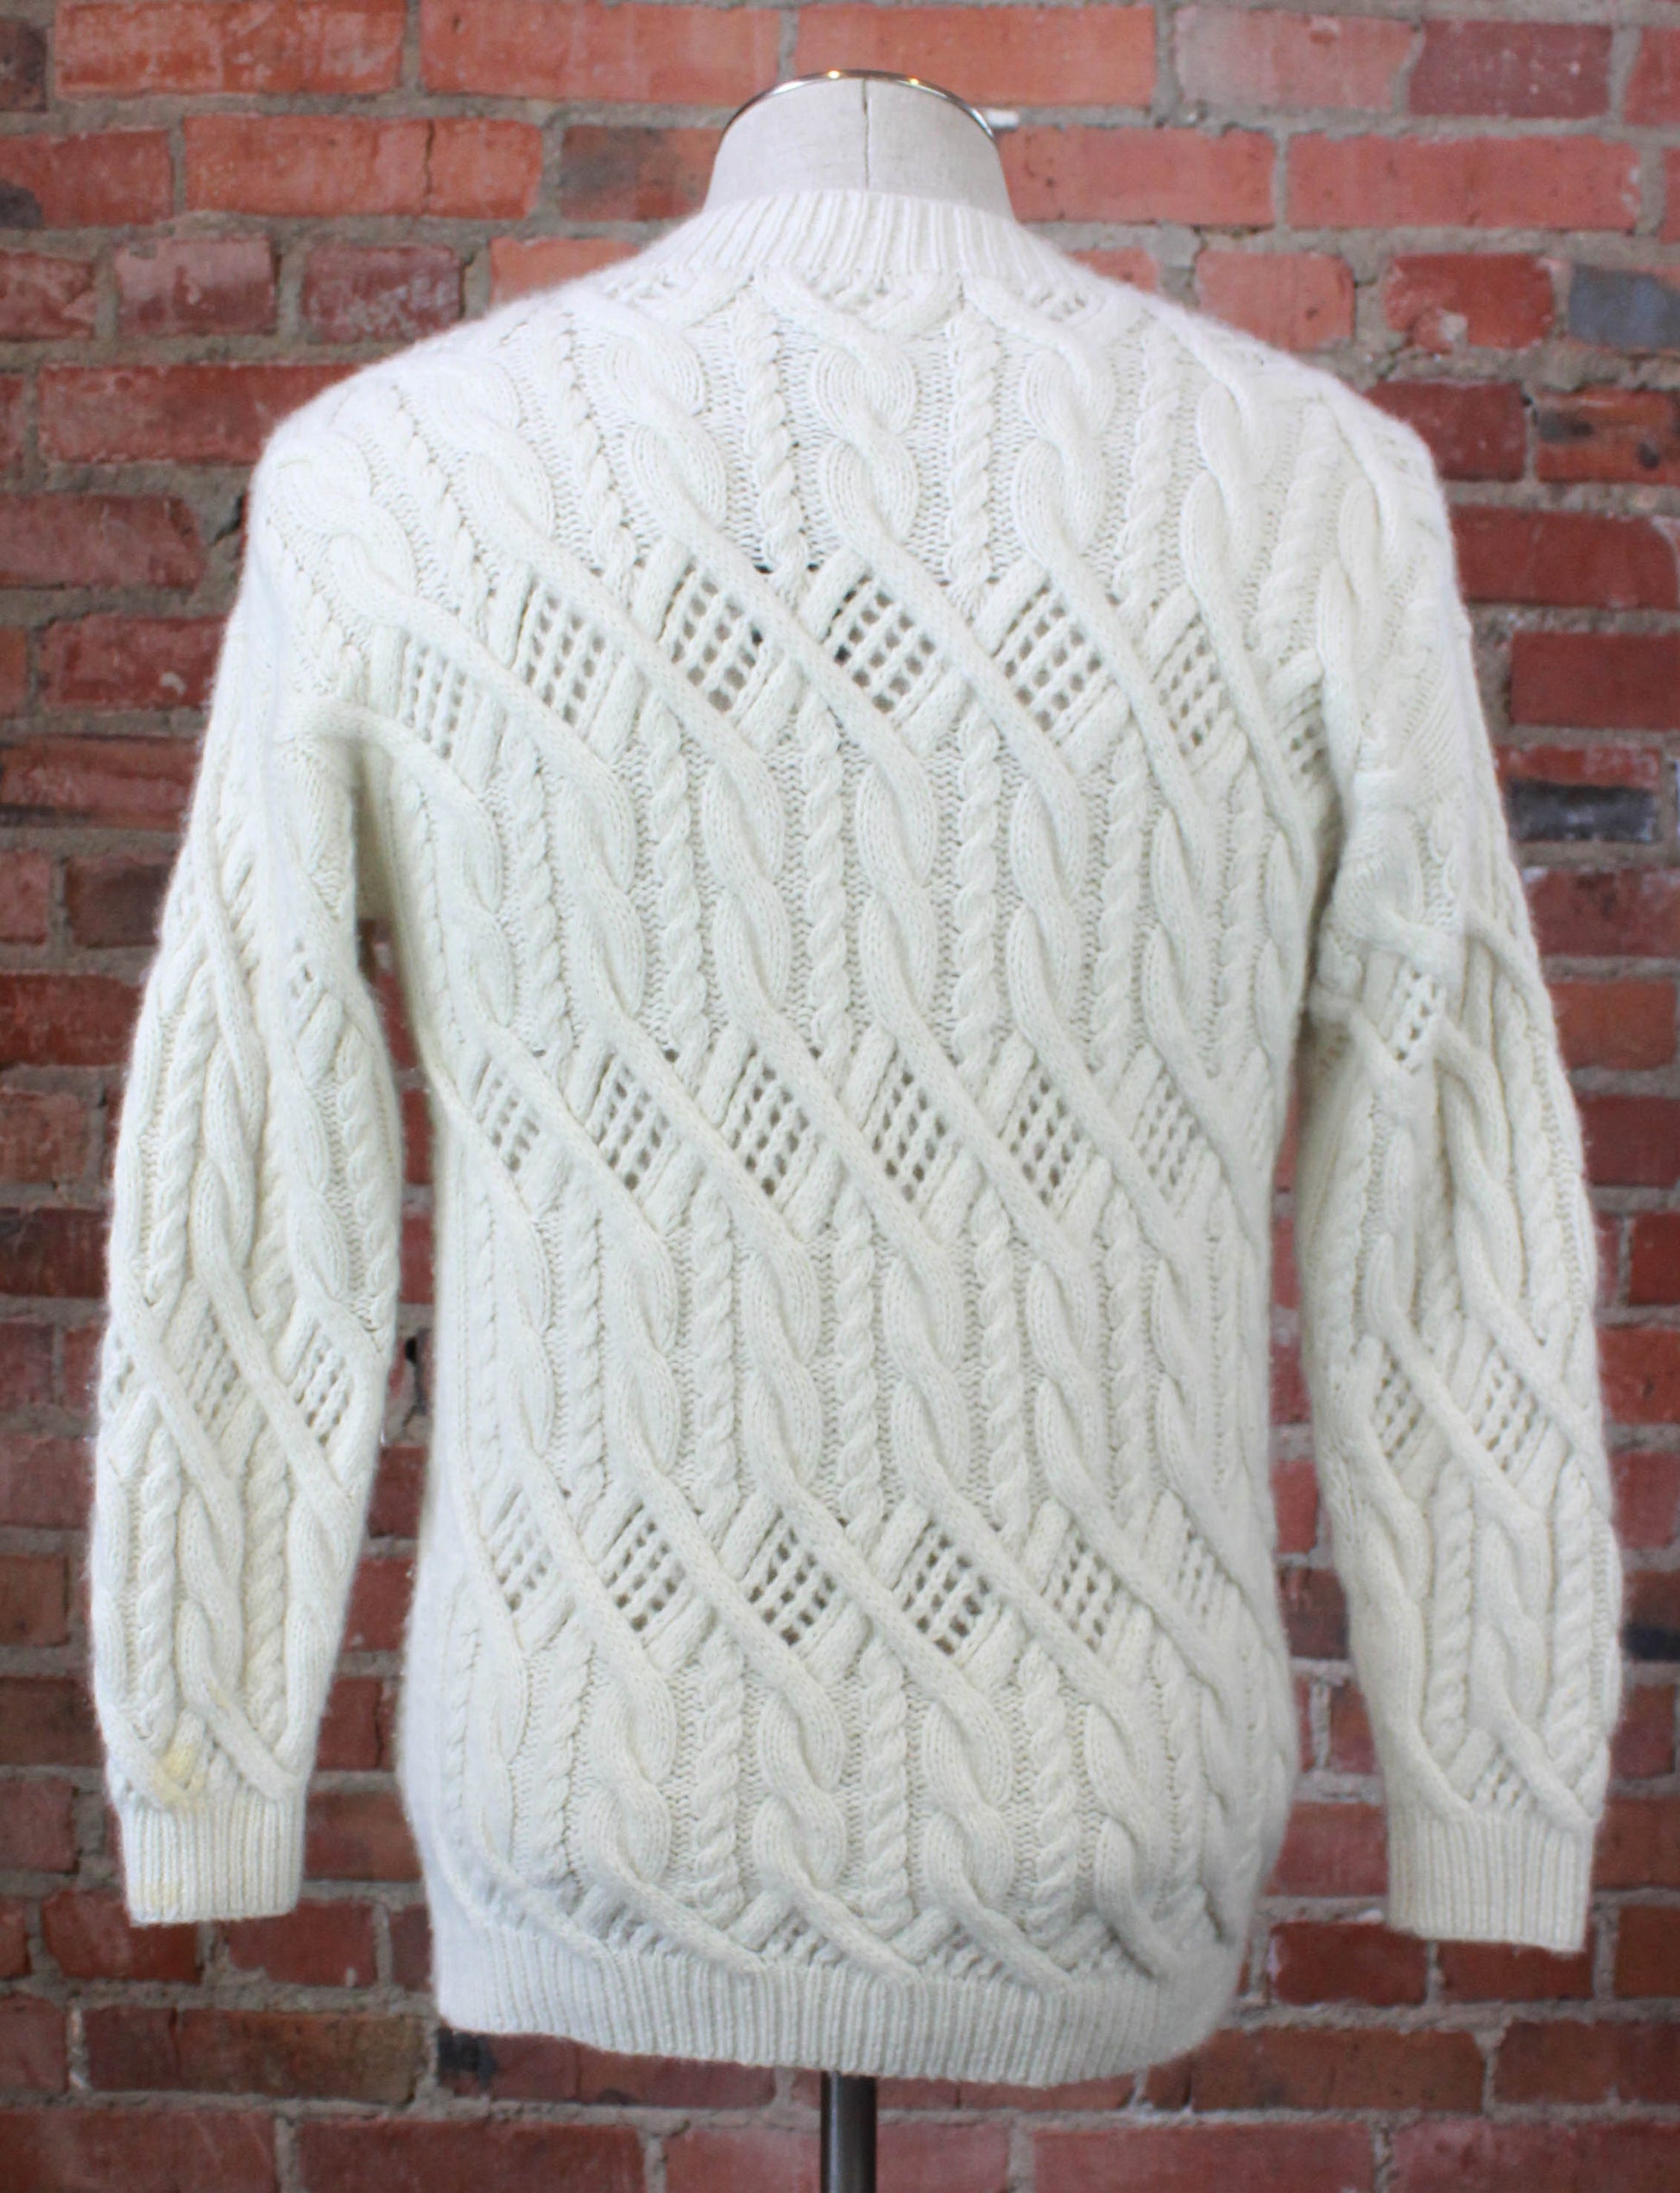 Vintage 80's/90's Neiman Marcus Cashmere Sweater Knit V Neck Pullover White Unisex Small/Medium